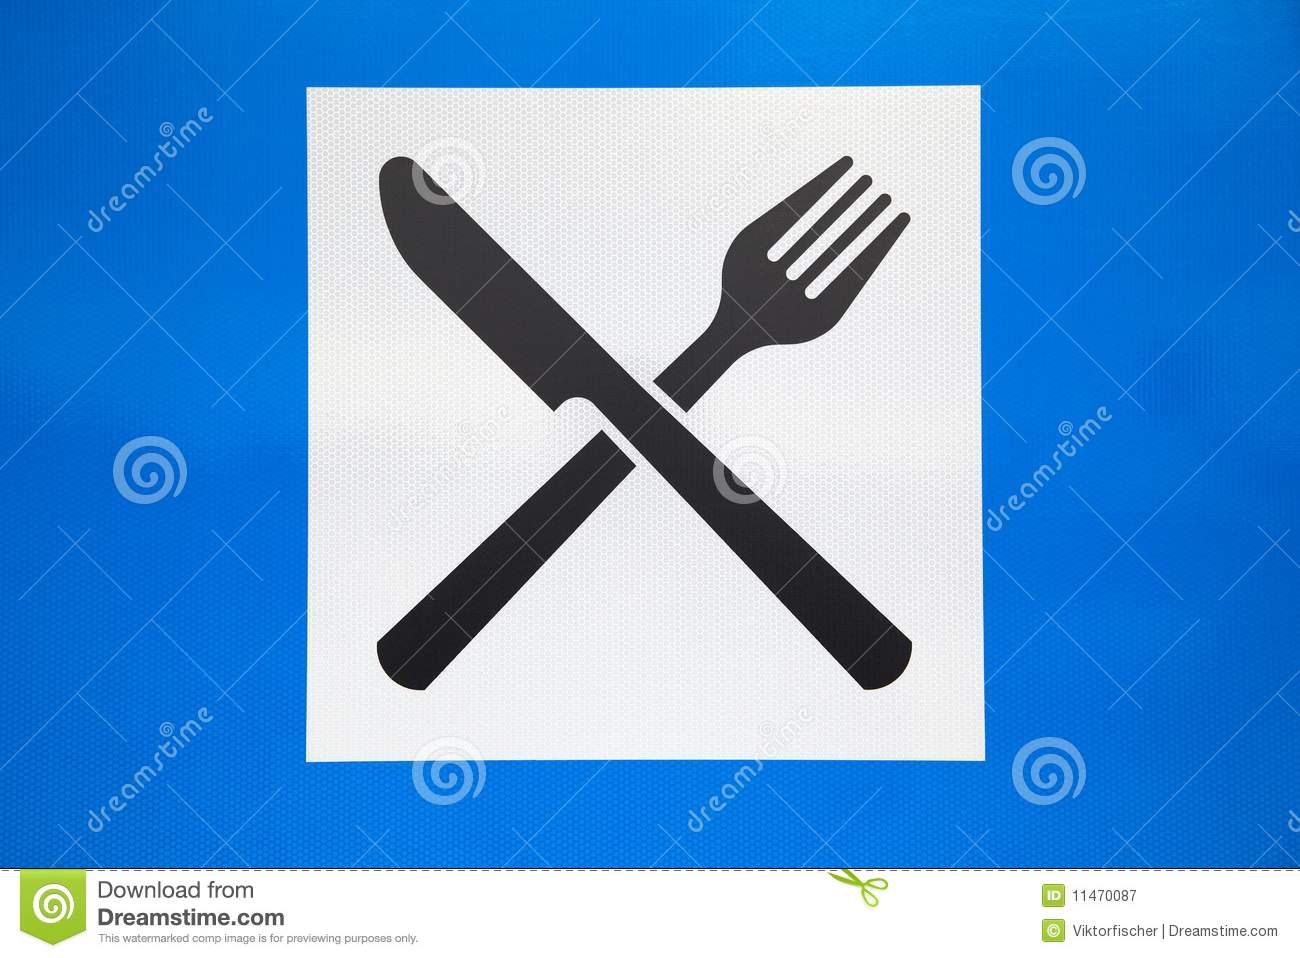 Restaurant Road Sign Royalty Free Stock Photography   Image  11470087